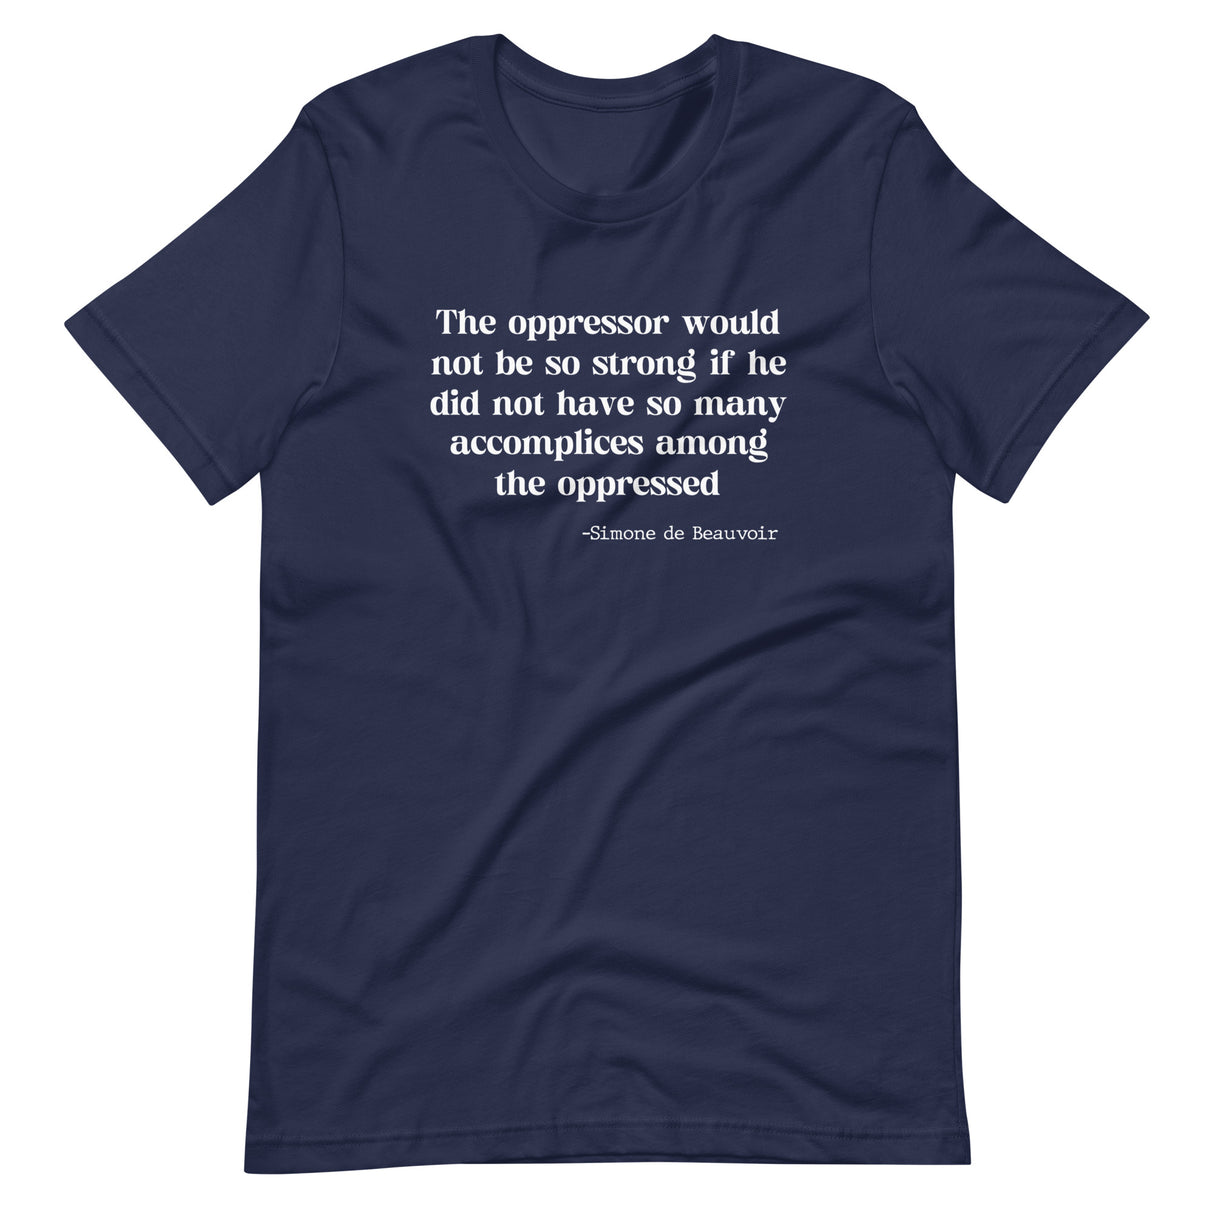 Accomplices Among The Oppressed Shirt